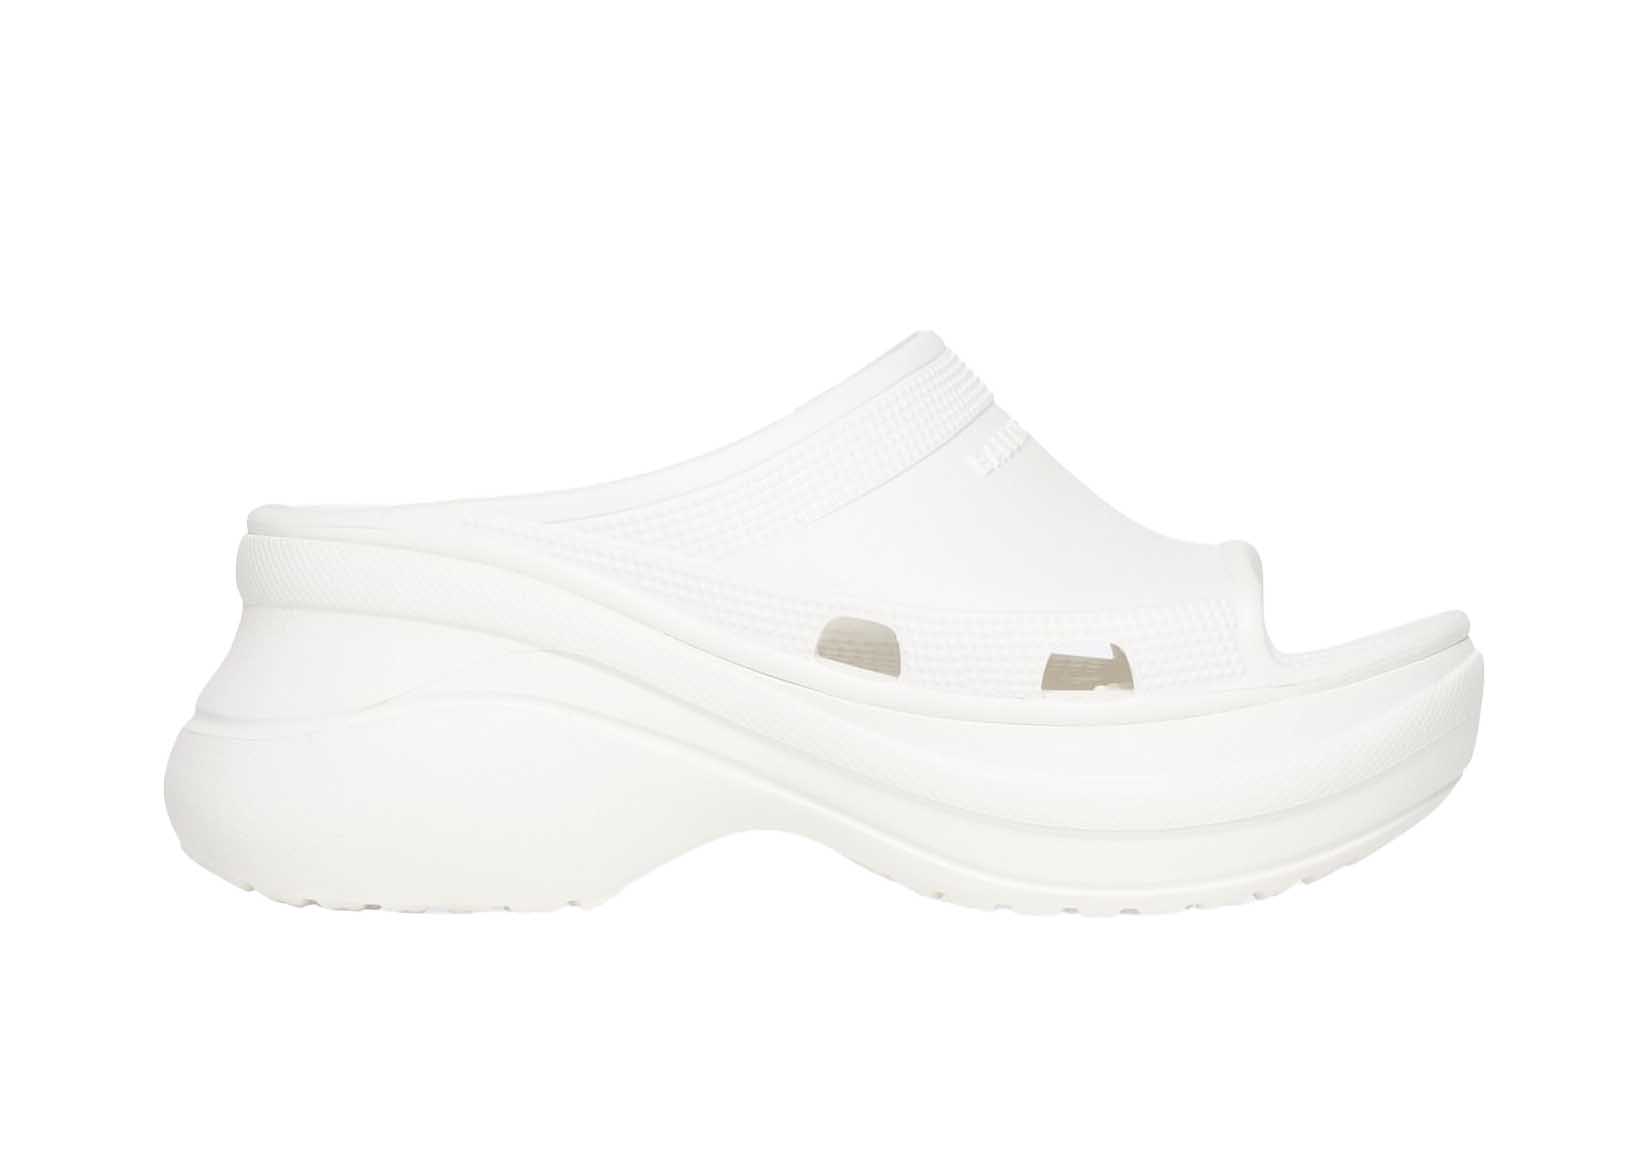 White Crocs Edition Boots by Balenciaga on Sale